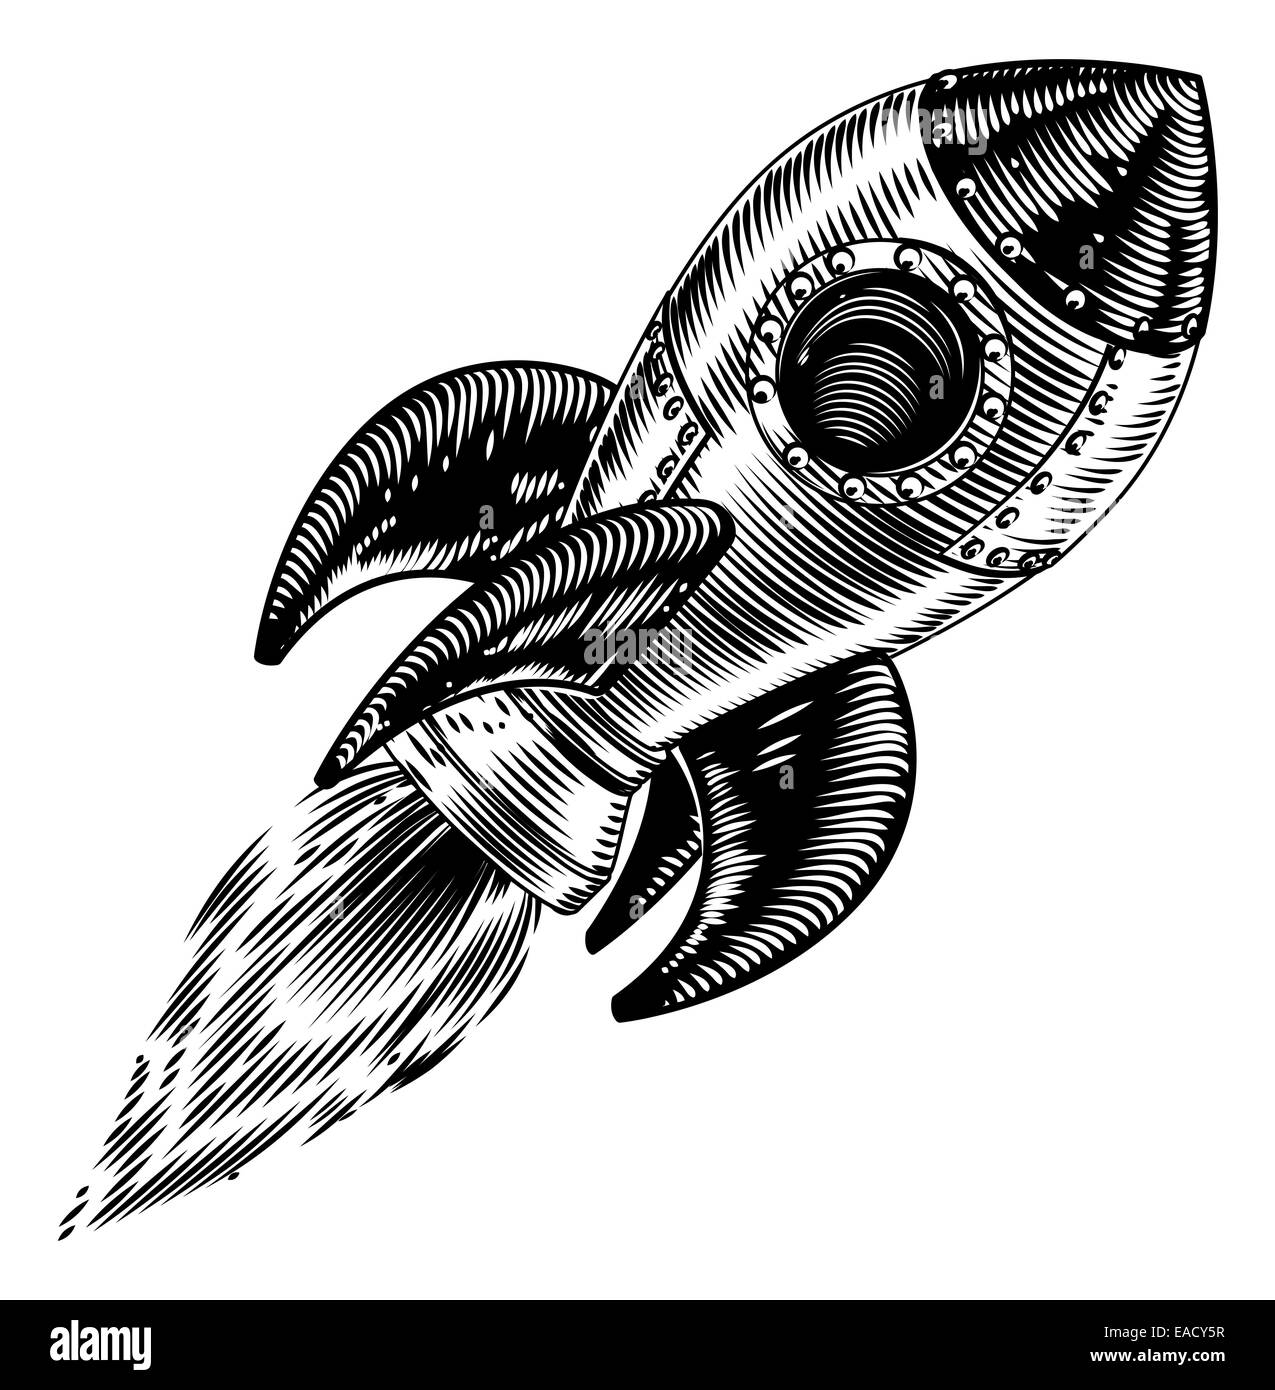 Illustration of a vintage style rocketship flying through the air Stock Photo